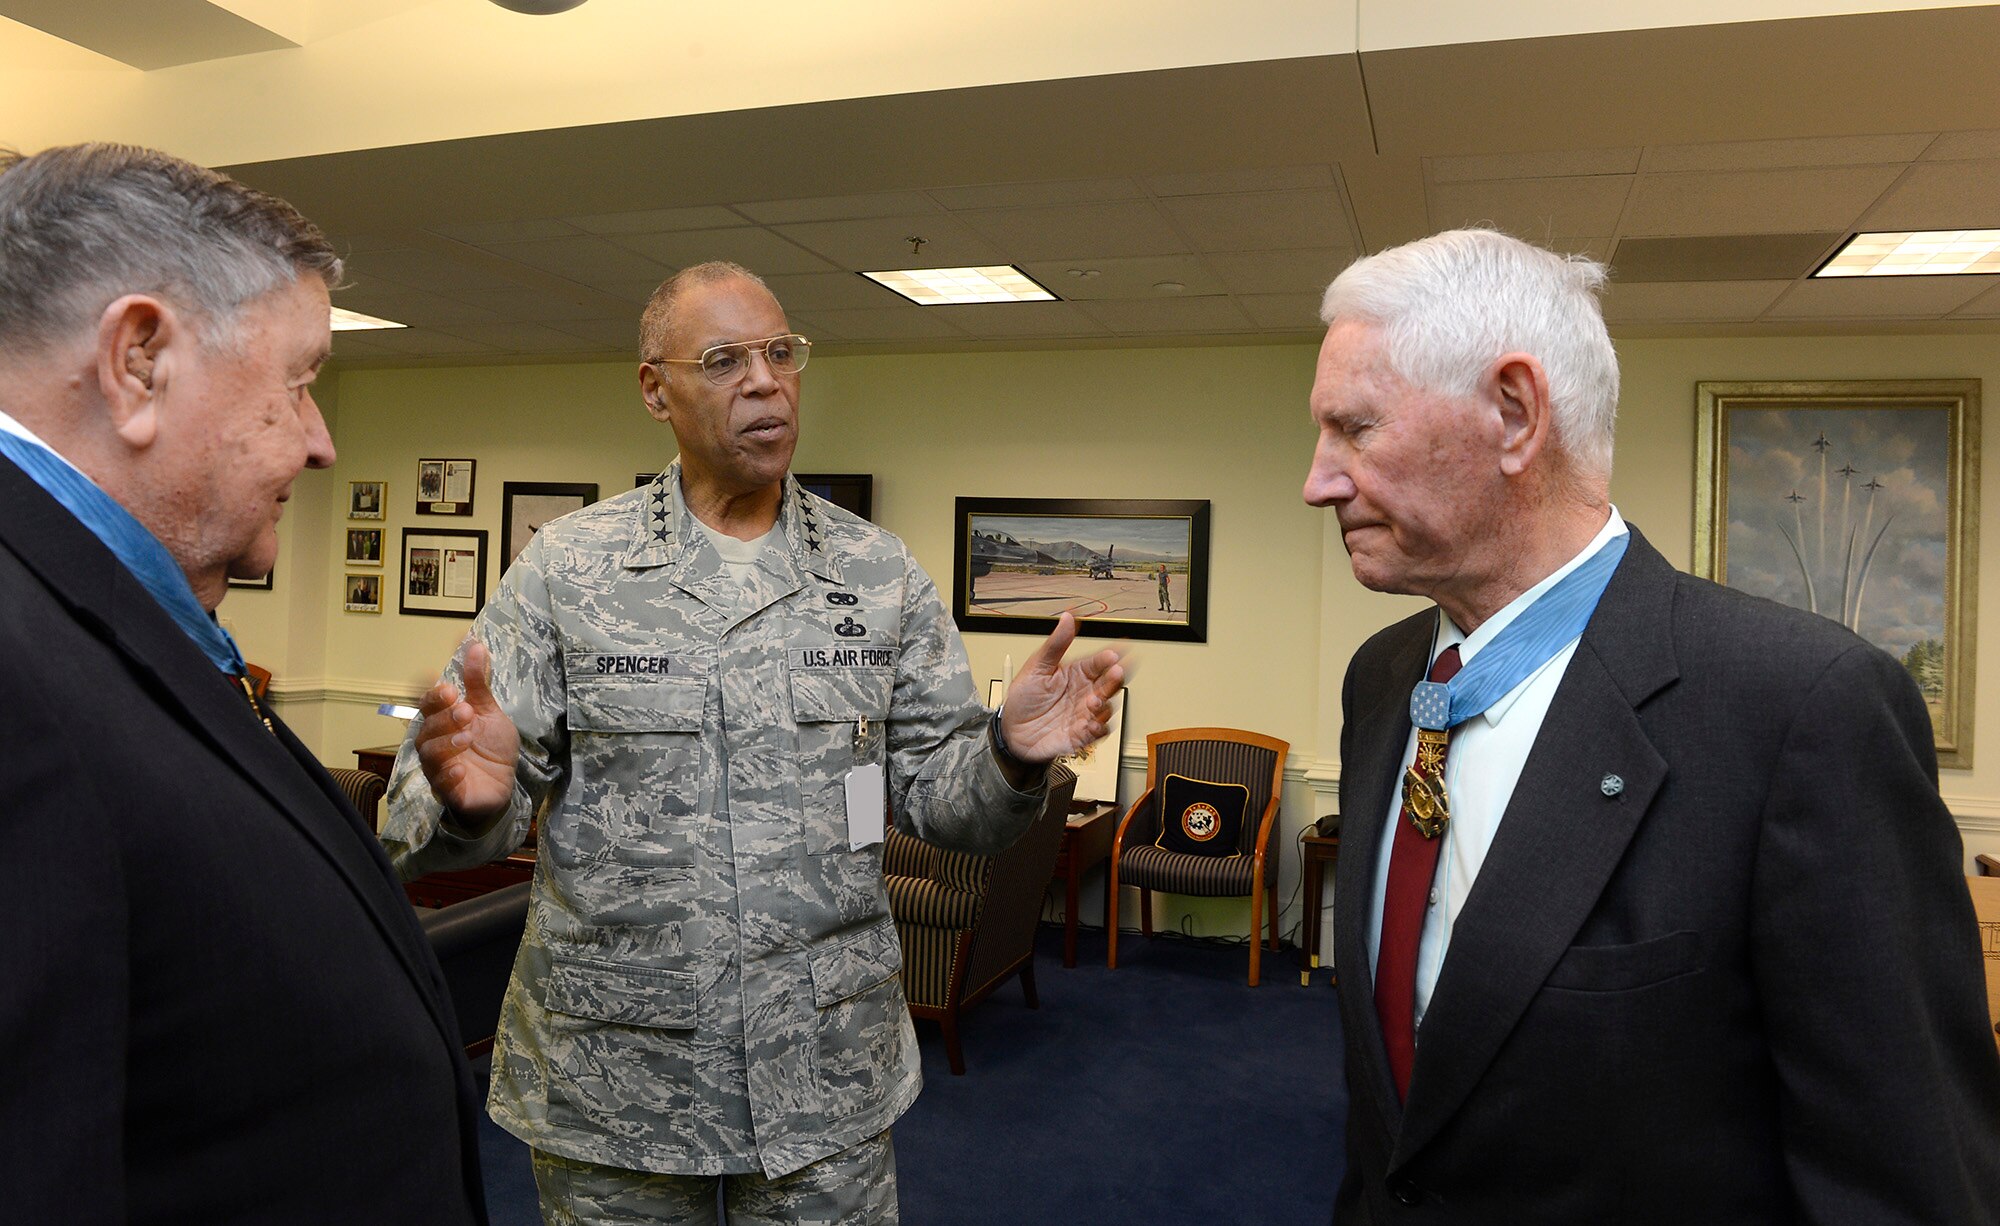 Air Force Vice Chief of Staff Gen. Larry Spencer meets with retired Cols. Leo Thorsness (right) and Joe Jackson, March 24, 2015, at the Pentagon in Washington D.C.  Thorsness and Jackson, both Medal of Honor recipients, were in the Pentagon for a Q-and-A session with members of the Air Staff, hosted in the Hall of Heroes.  Jackson and Thorsness also met with Secretary of the Air Force Deborah Lee James.  (U.S. Air Force photo/Scott M. Ash) 